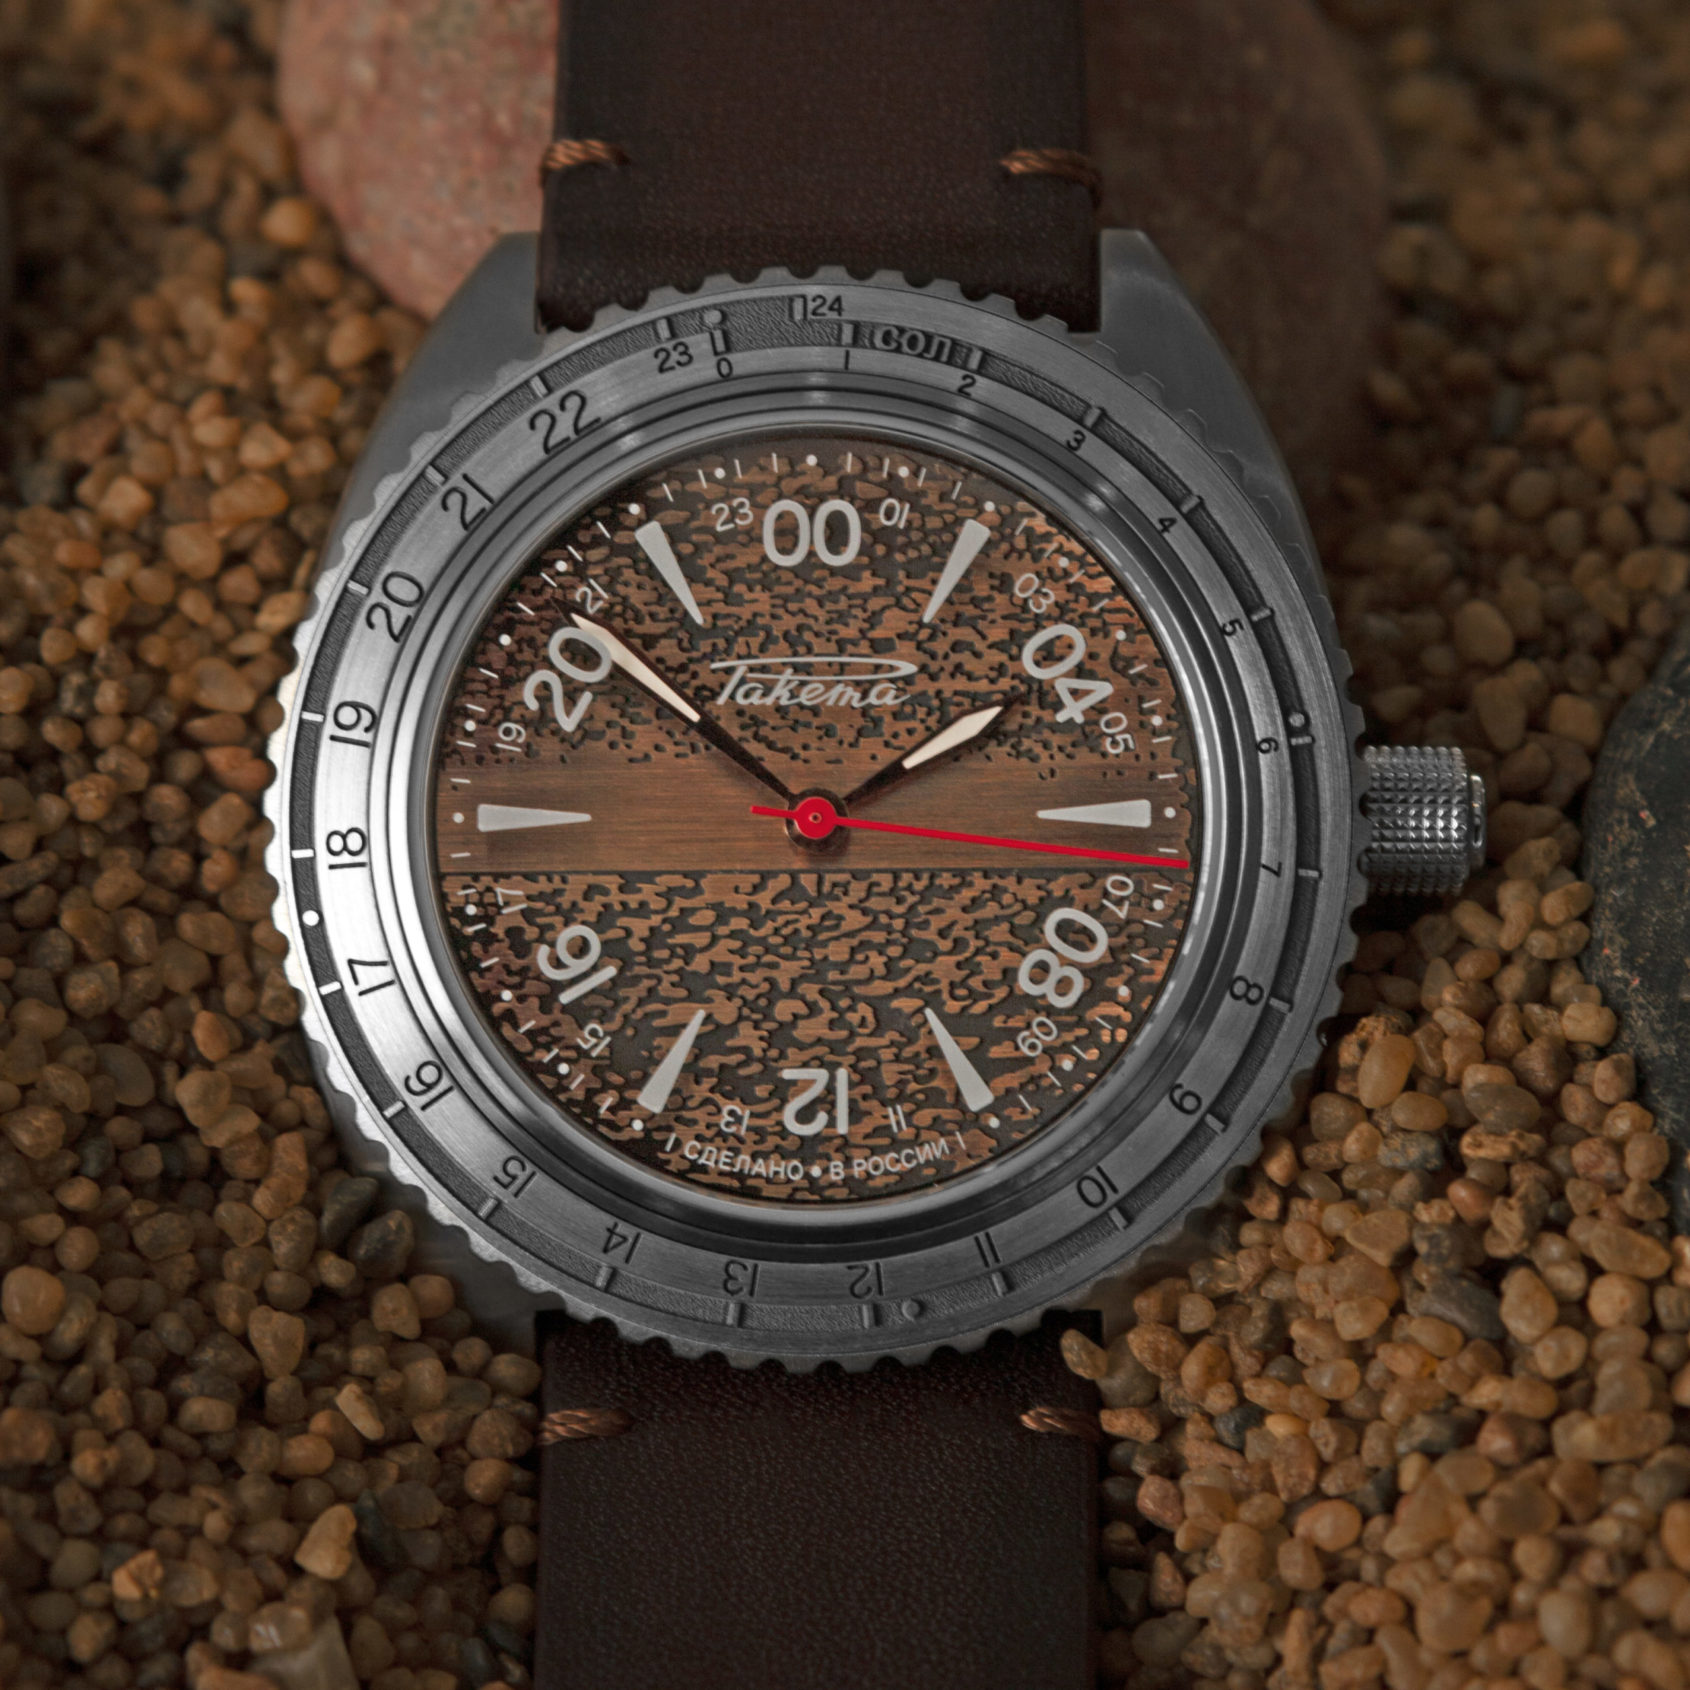 Raketa teams-up with The Limited Edition and Scottish Watches to present the Mars-3